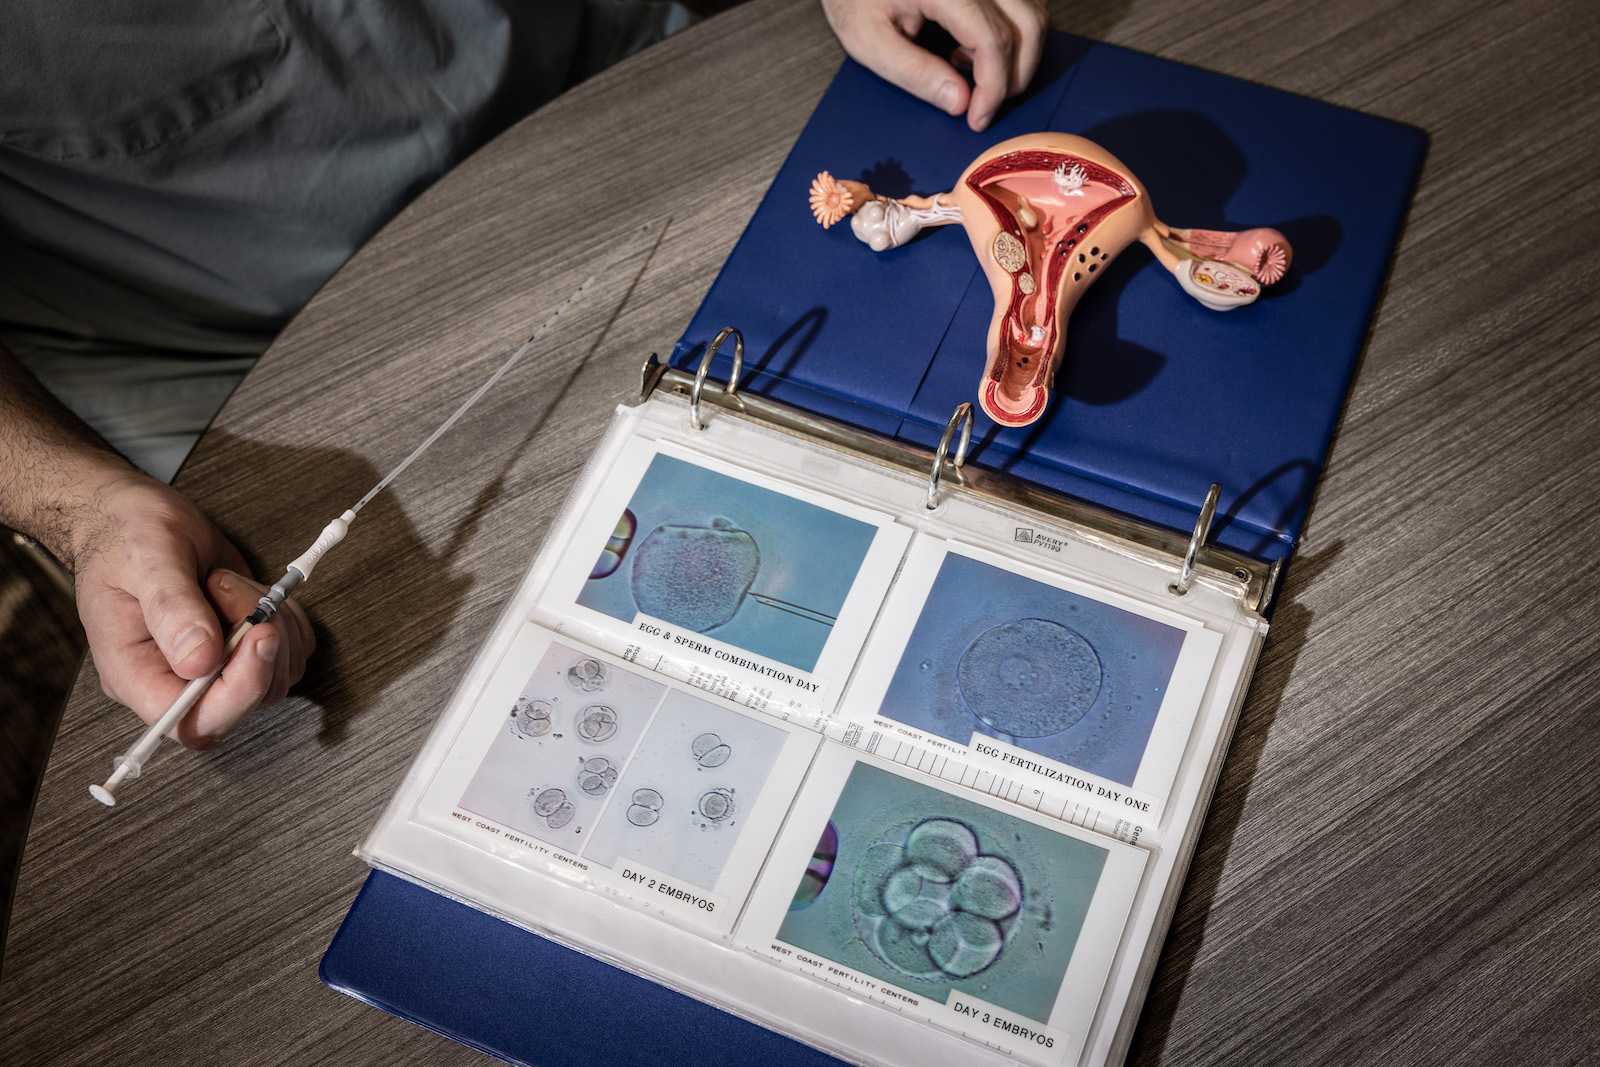 An embryo transfer catheter and a model of a uterus are displayed in a fertility clinic in California.